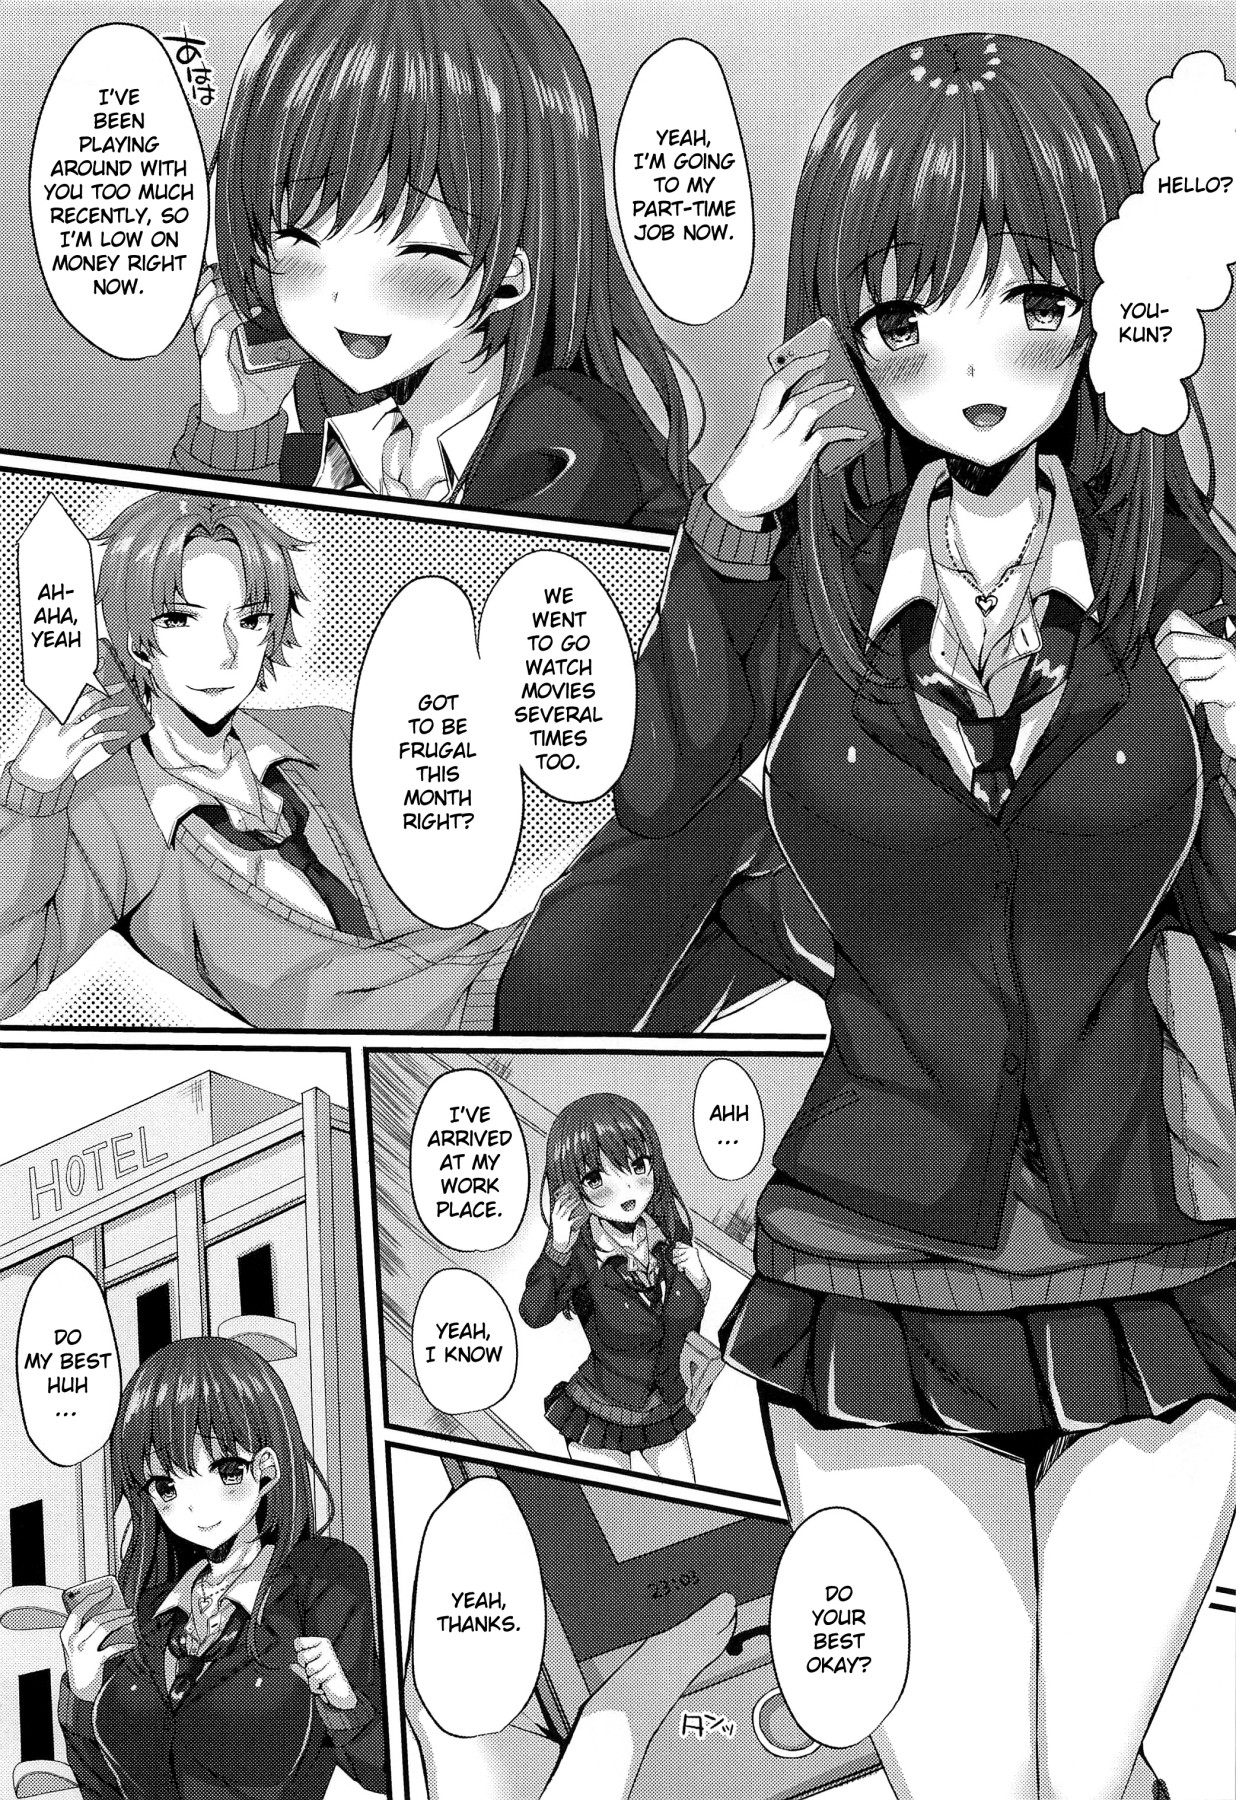 Student Delivery - Takatou Yuri's Personal NTR Experience - Doujins-  Original Series